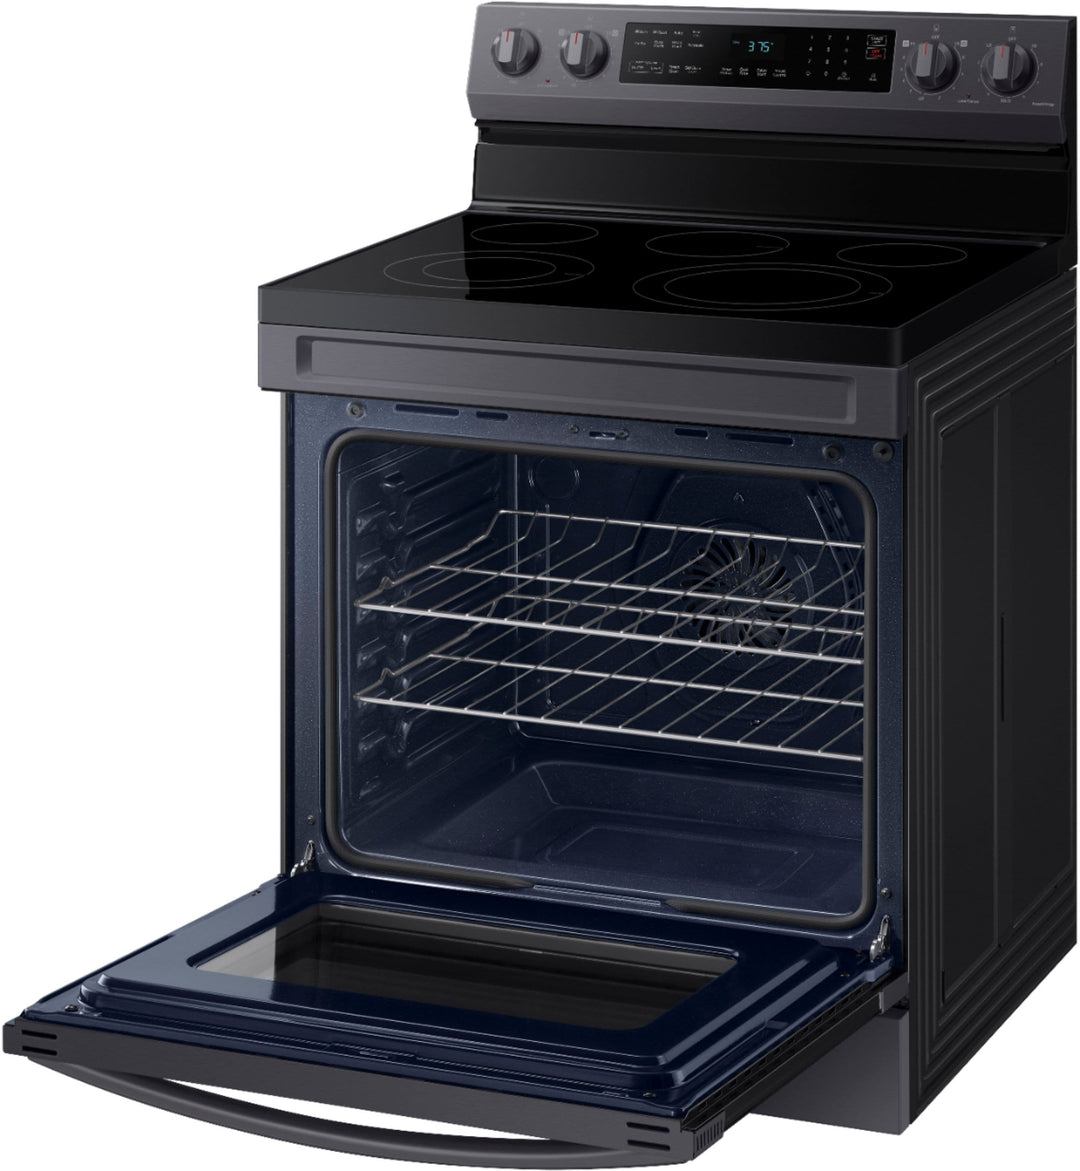 Samsung - 6.3 cu. ft. Freestanding Electric Range with WiFi, No-Preheat Air Fry & Convection - Black stainless steel_3